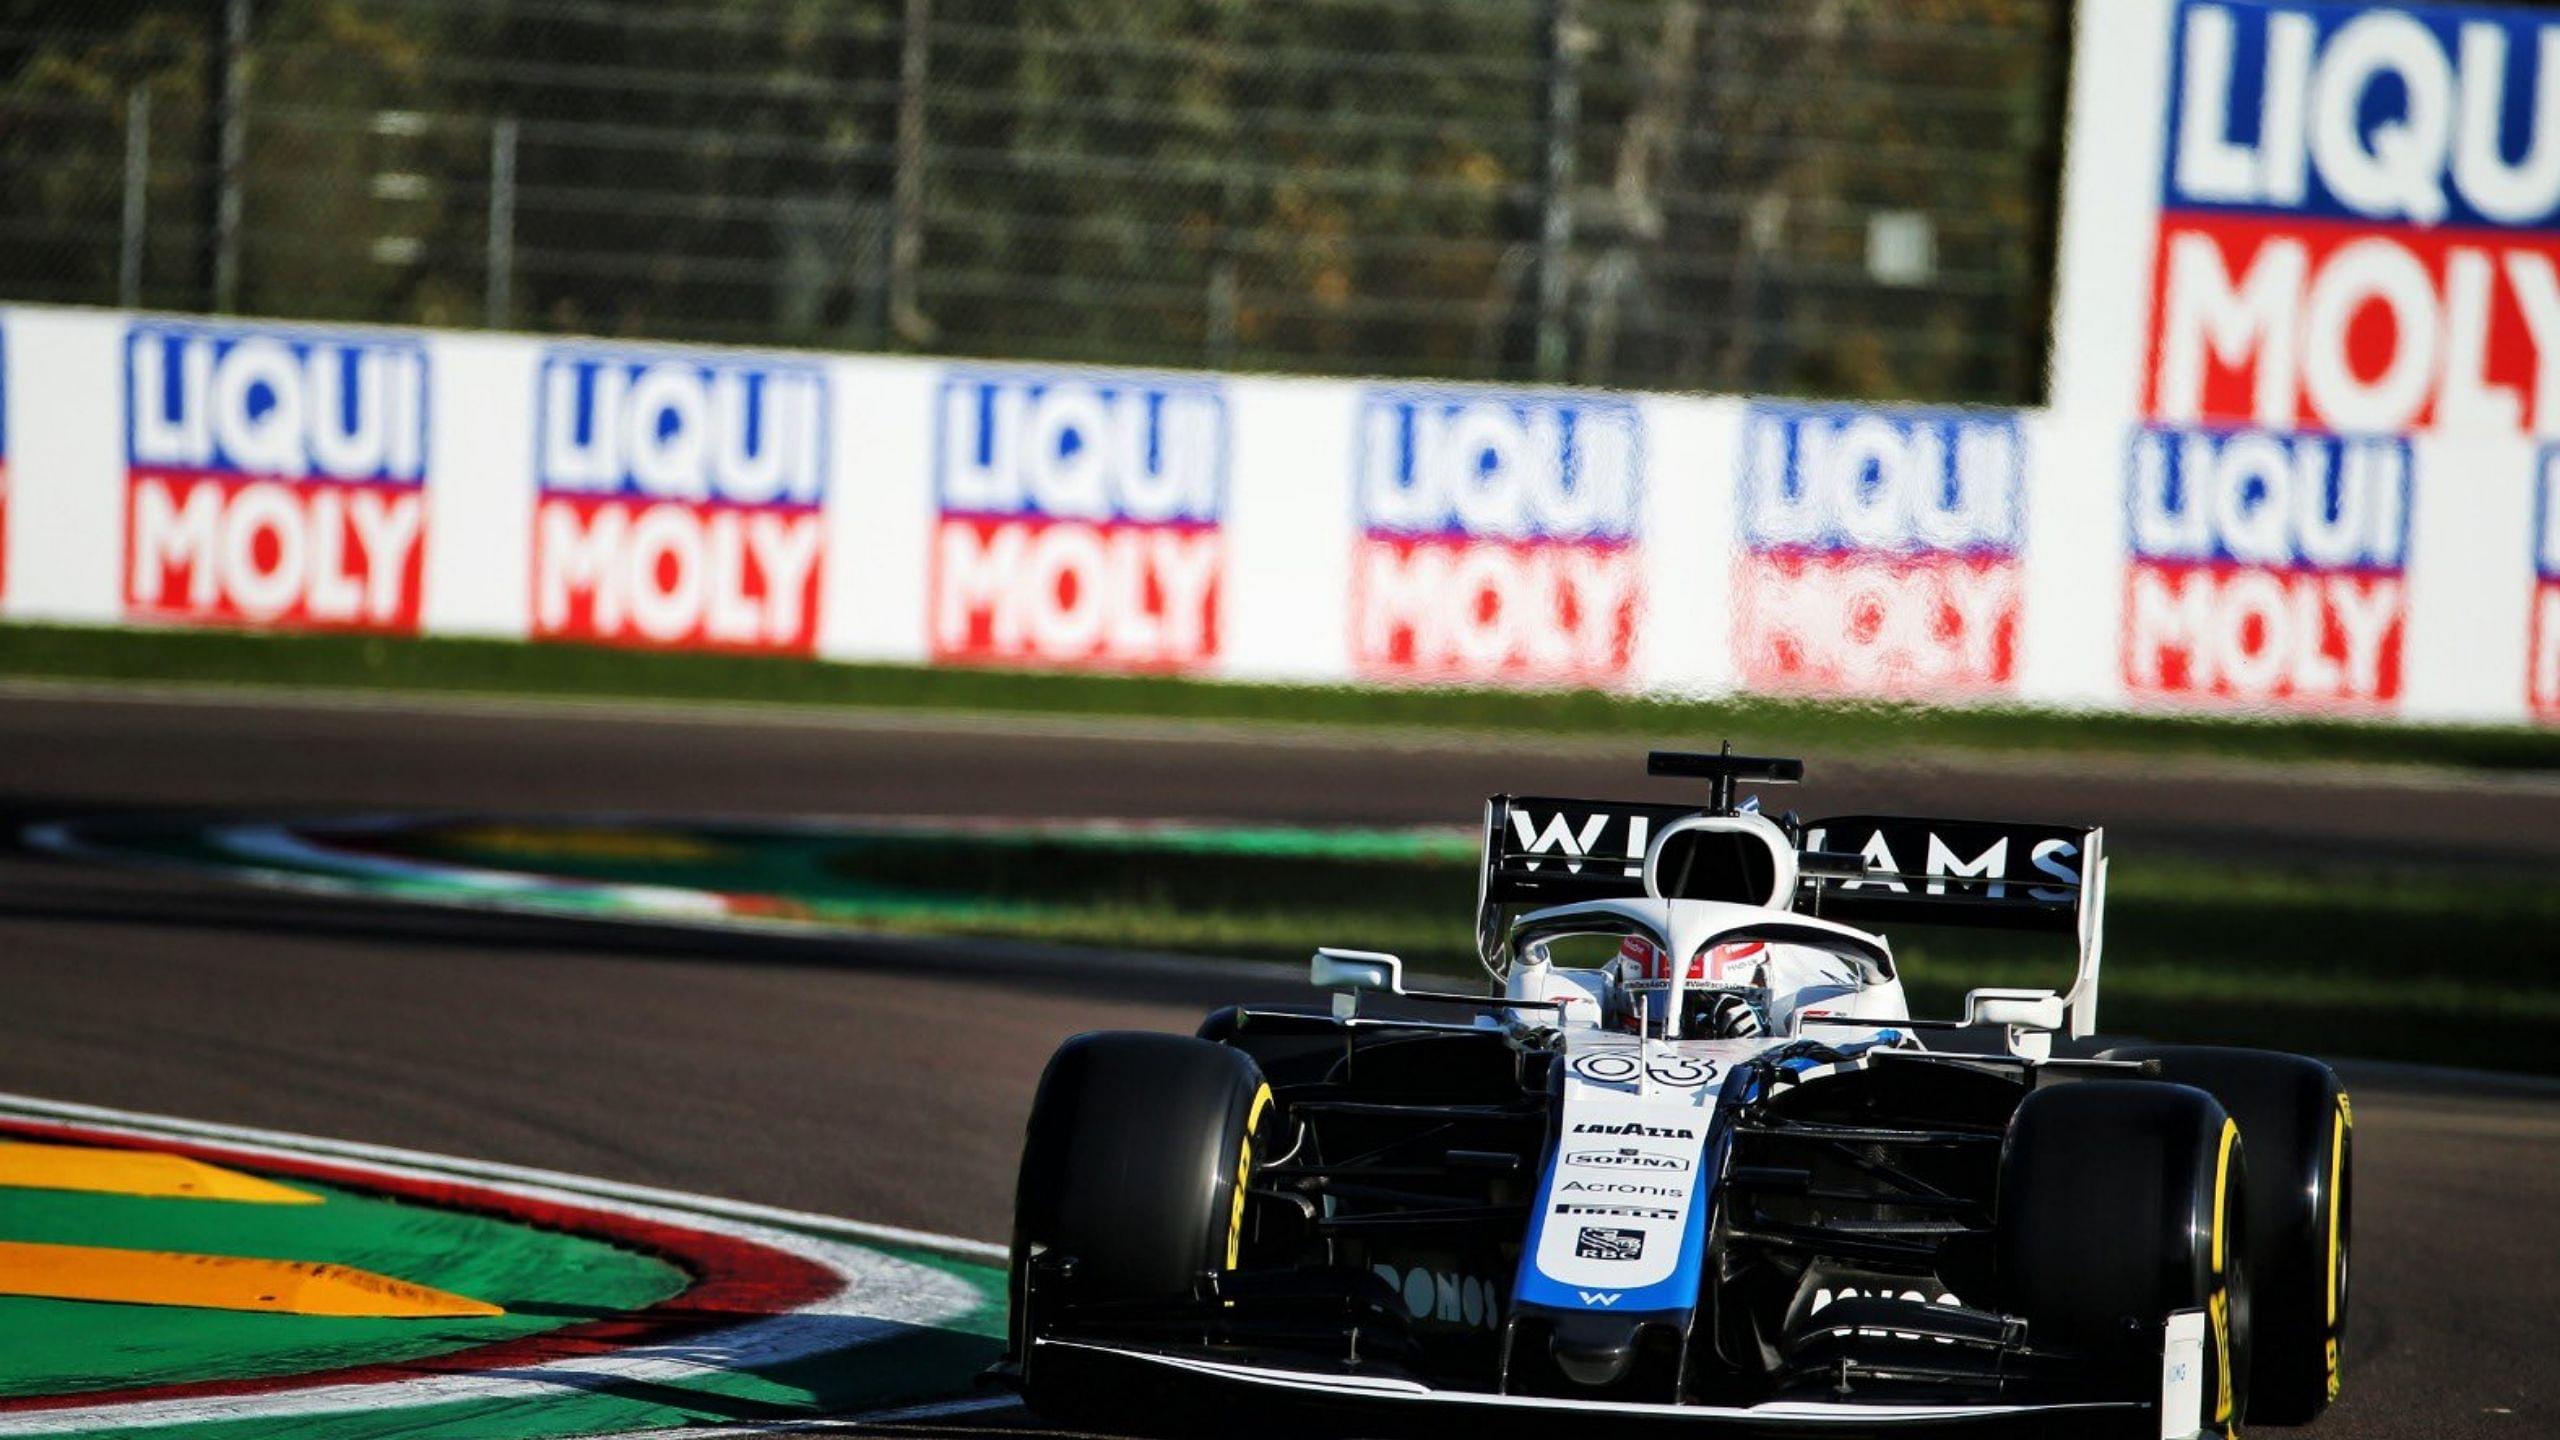 "It’s such a schoolboy error" - George Russell rues mistake at Imola that cost Williams its first points this season